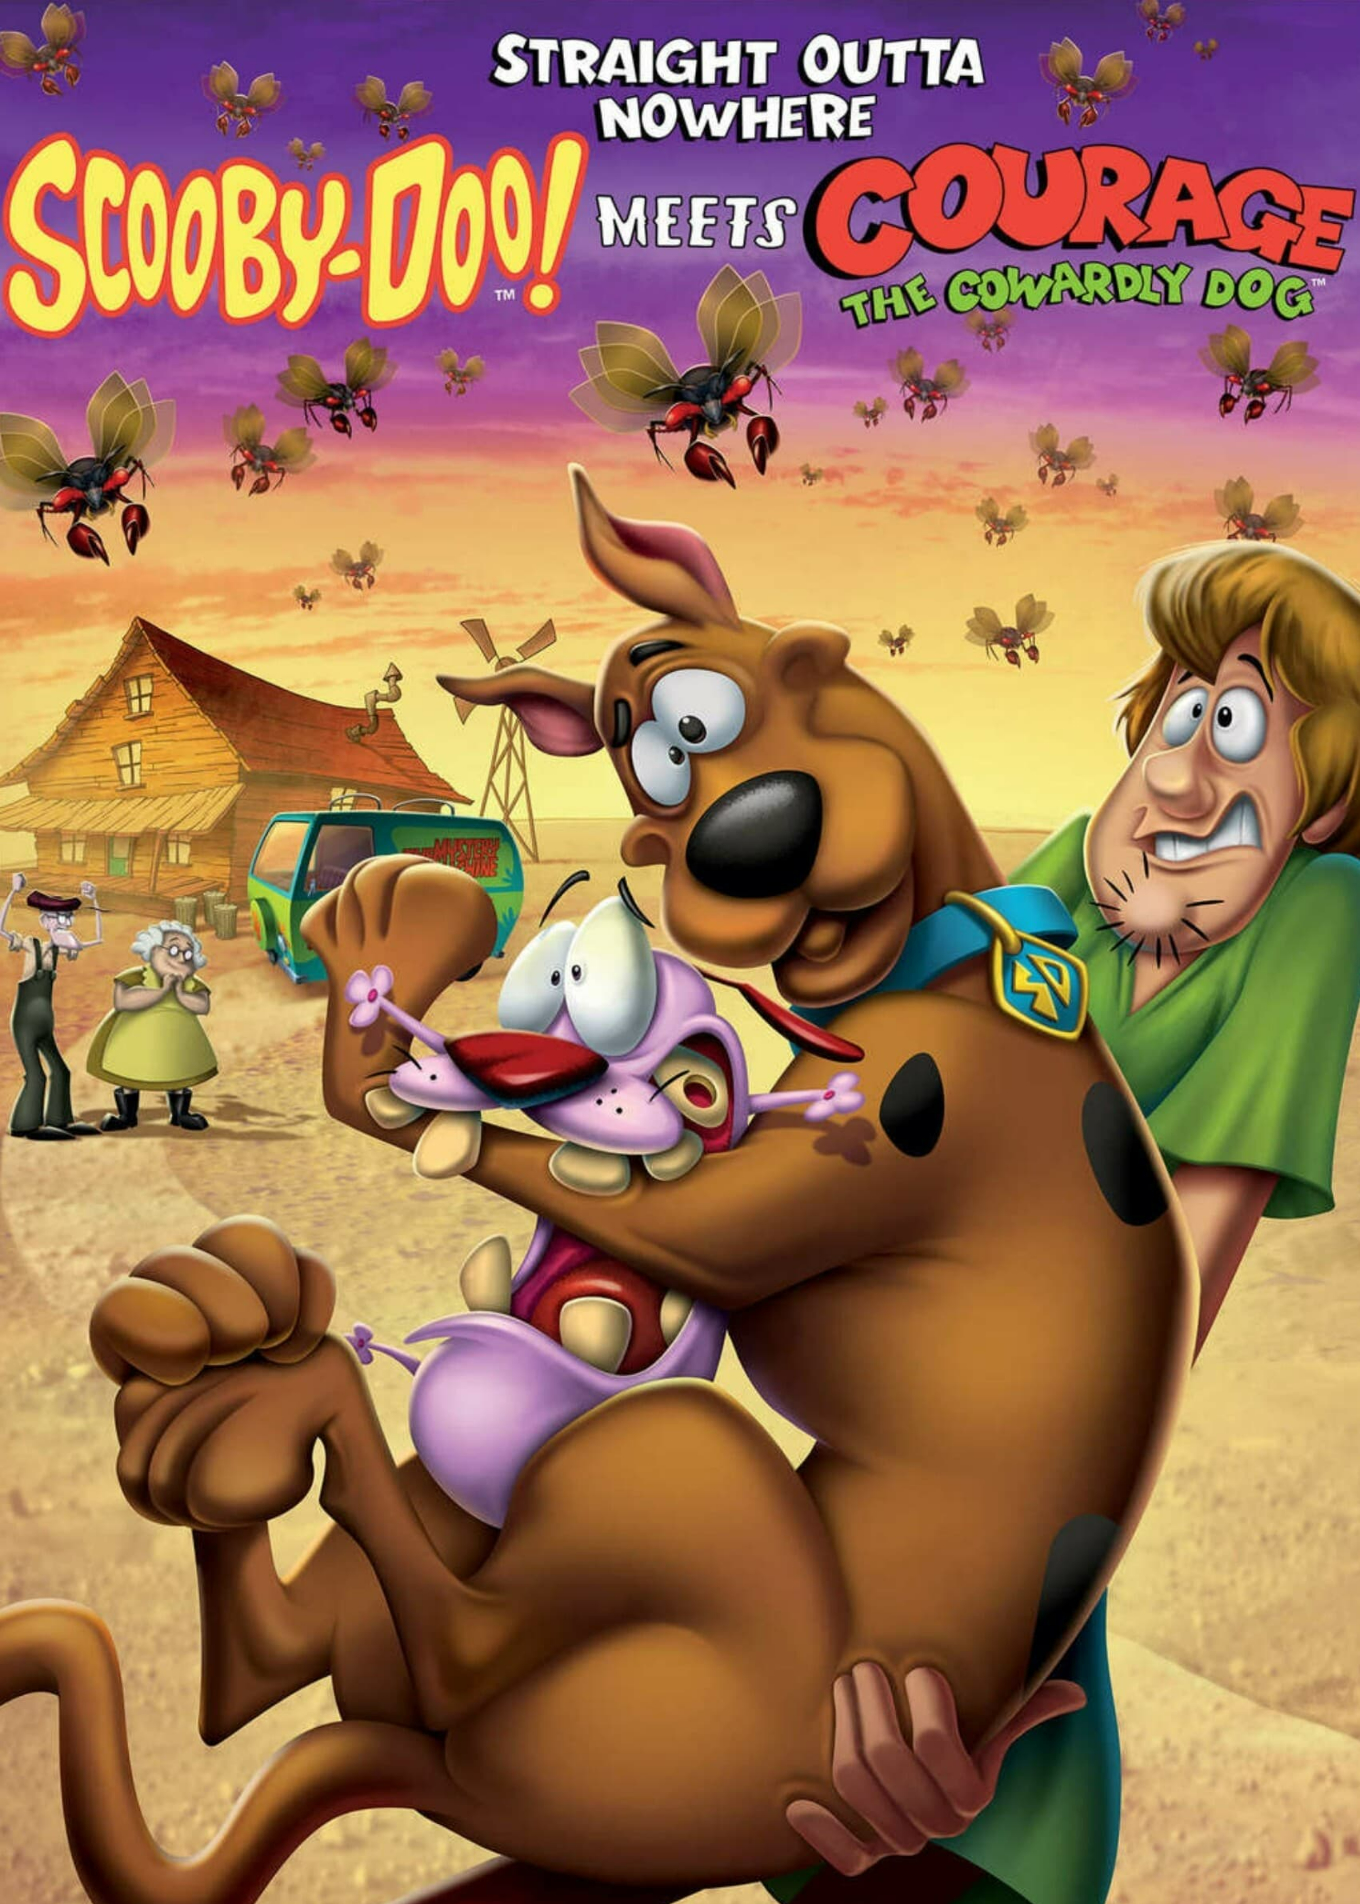 Straight Outta Nowhere: Scooby-Doo! Meets Courage The Cowardly Dog (Straight Outta Nowhere: Scooby-Doo! Meets Courage The Cowardly Dog) [2021]